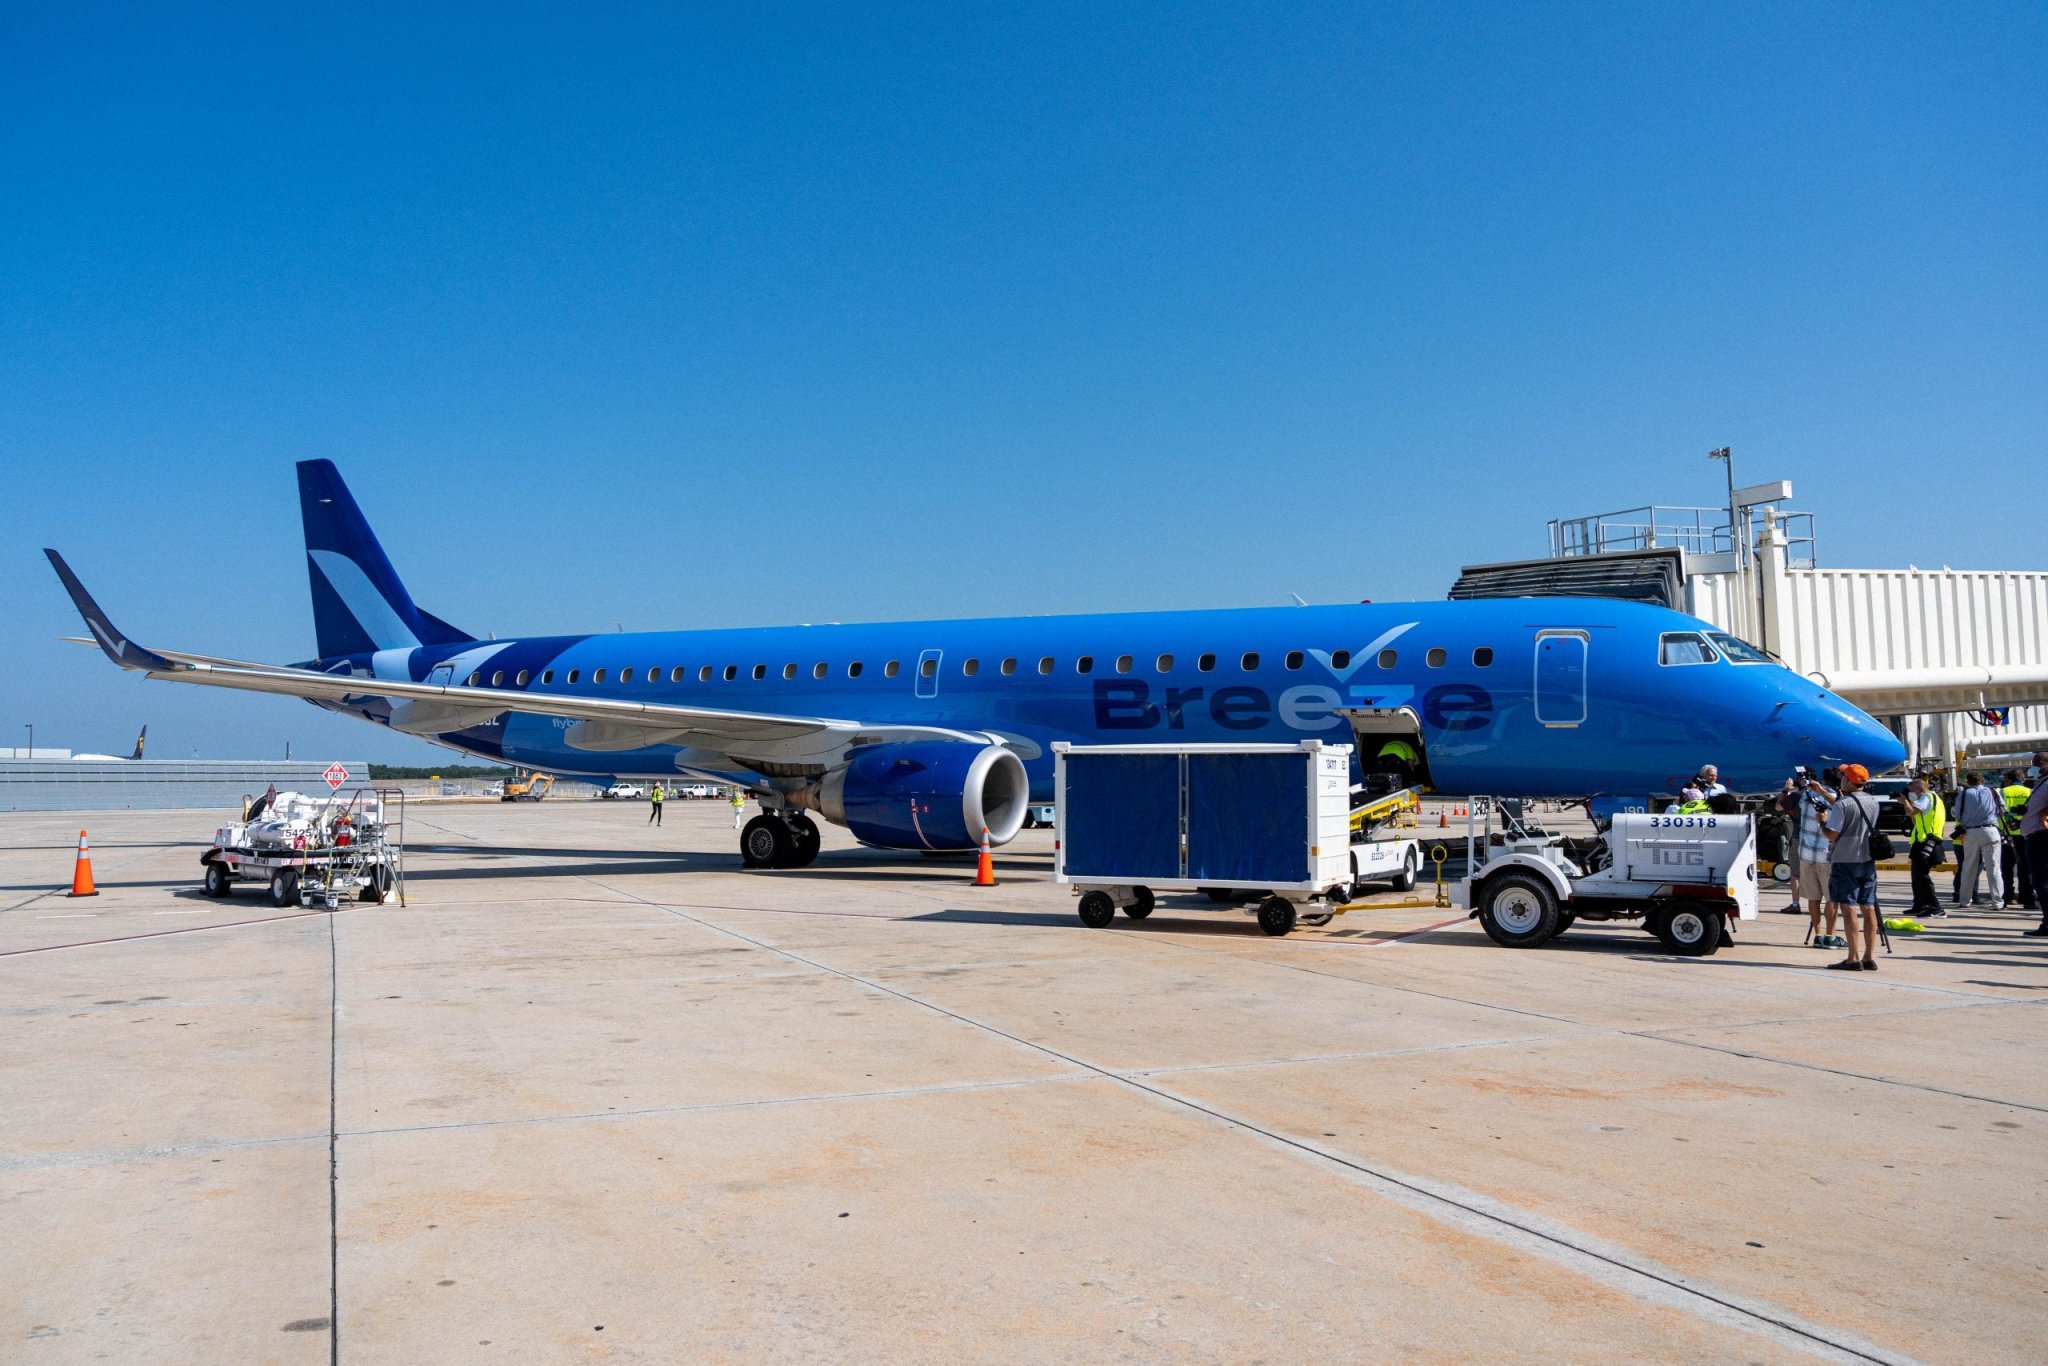 First look: What Breeze Airways, the new airline by JetBlue founder David Neeleman, brings to the skies